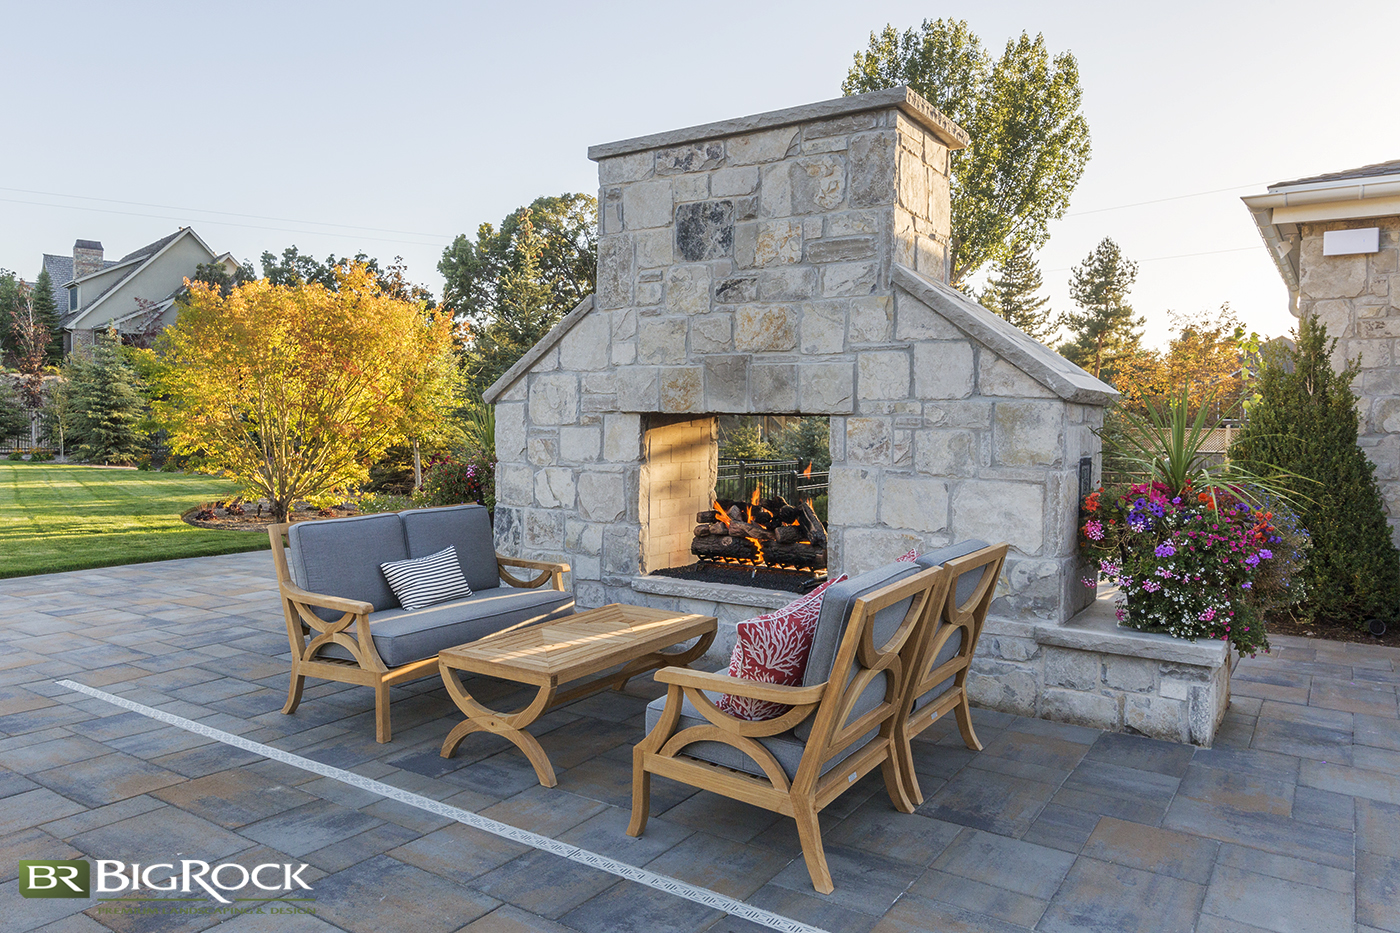 Big Rock Landscaping is your expert in outdoor fireplace builds. Big Rock can install gas fireplaces or wood fireplace structures to match your patio or the exterior of your home.